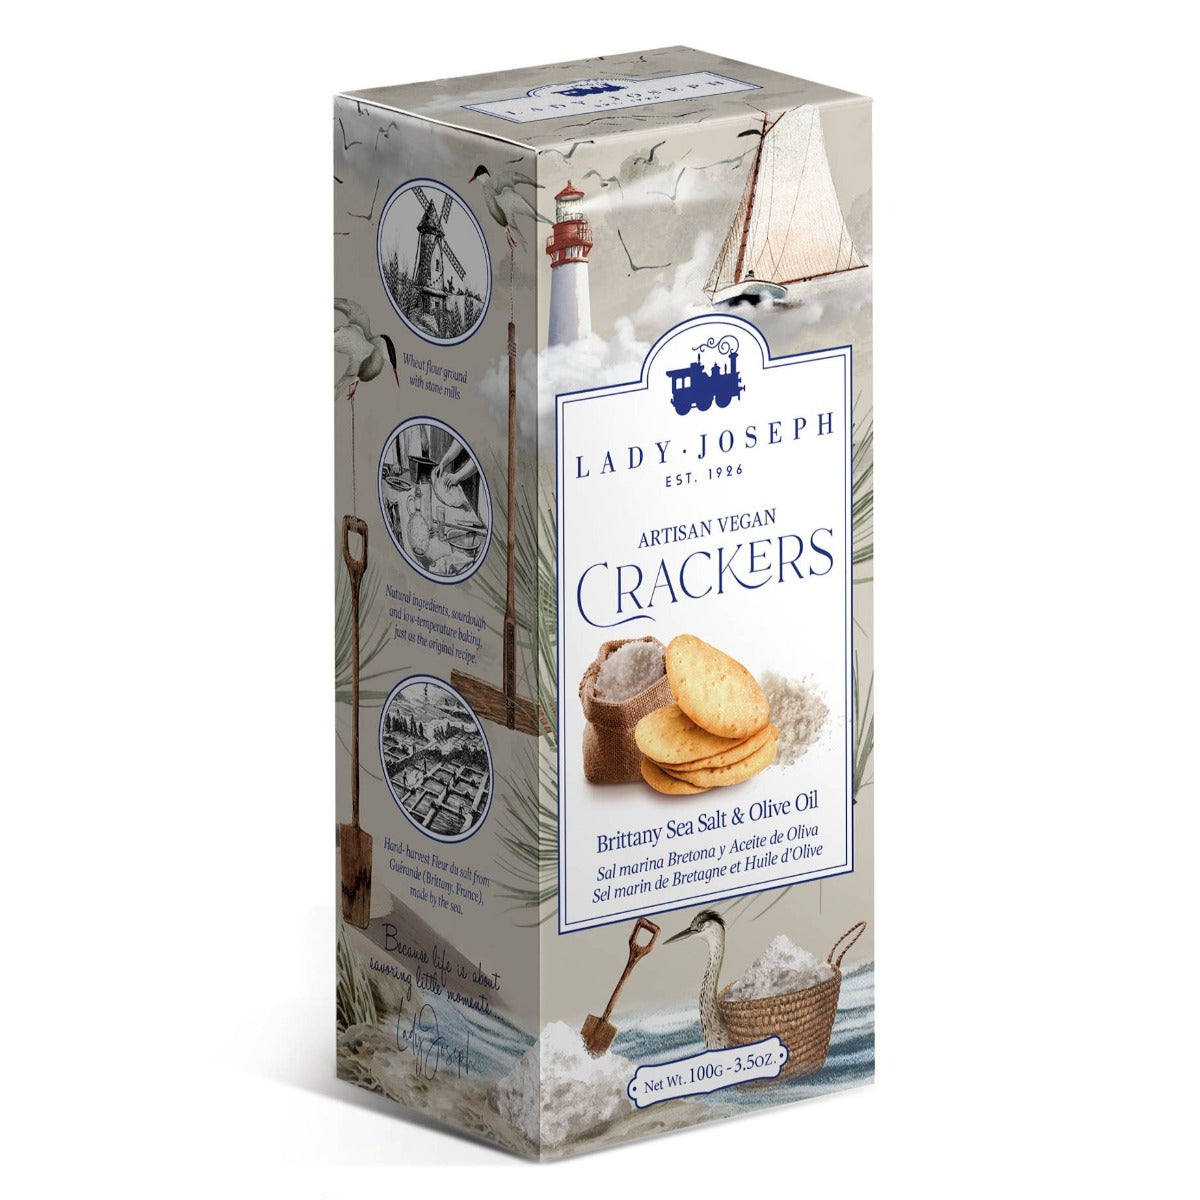 brittany sea salt and olive oil crackers